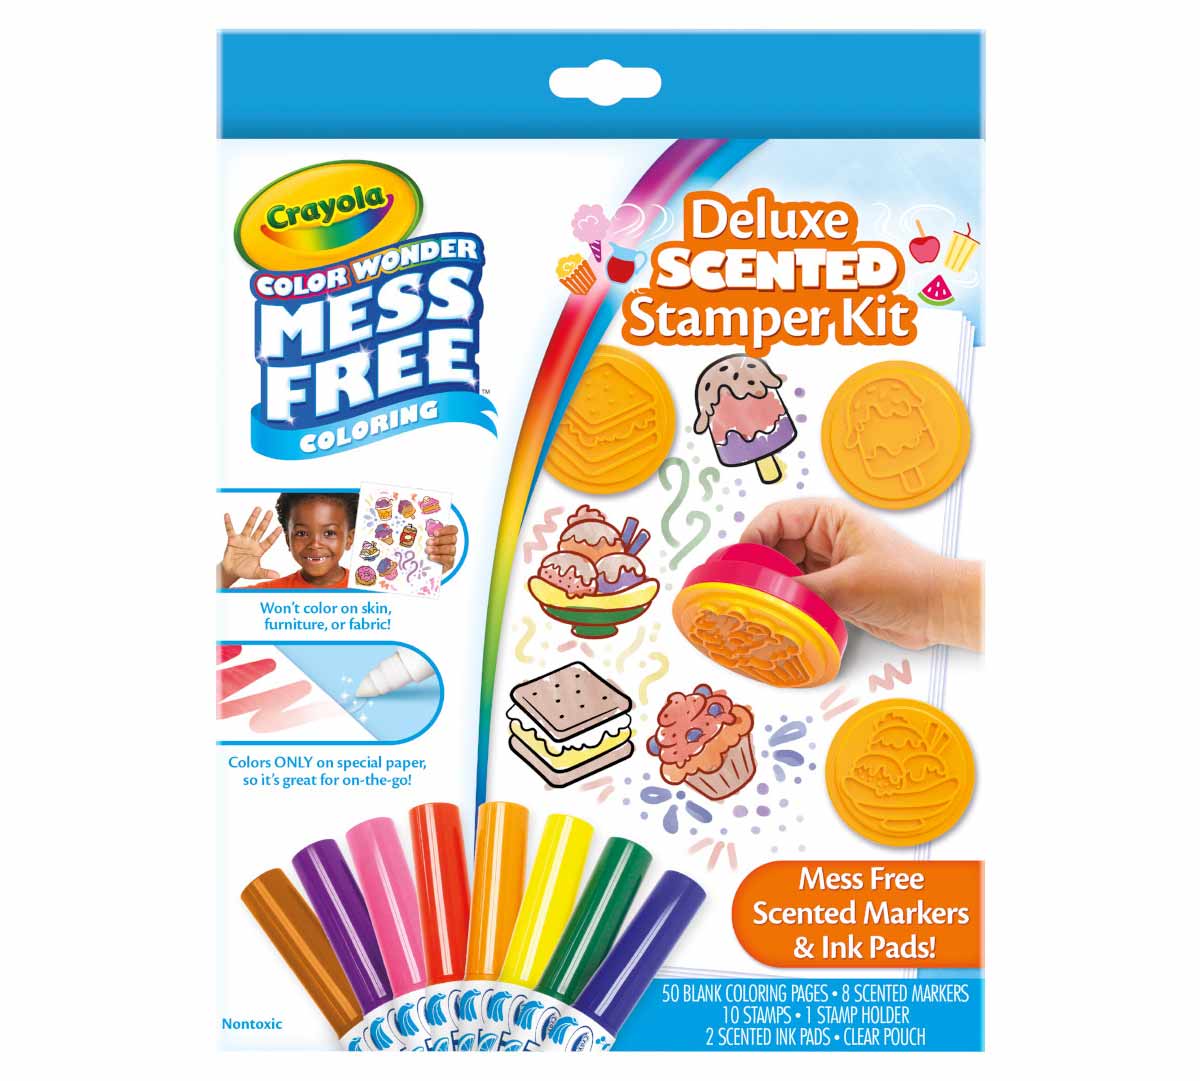 https://shop.crayola.com/on/demandware.static/-/Sites-crayola-storefront/default/dw0dfd5e97/images/75-2836_CW-Deluxe-Scented-Stamping-Kit_PDP_02.jpg